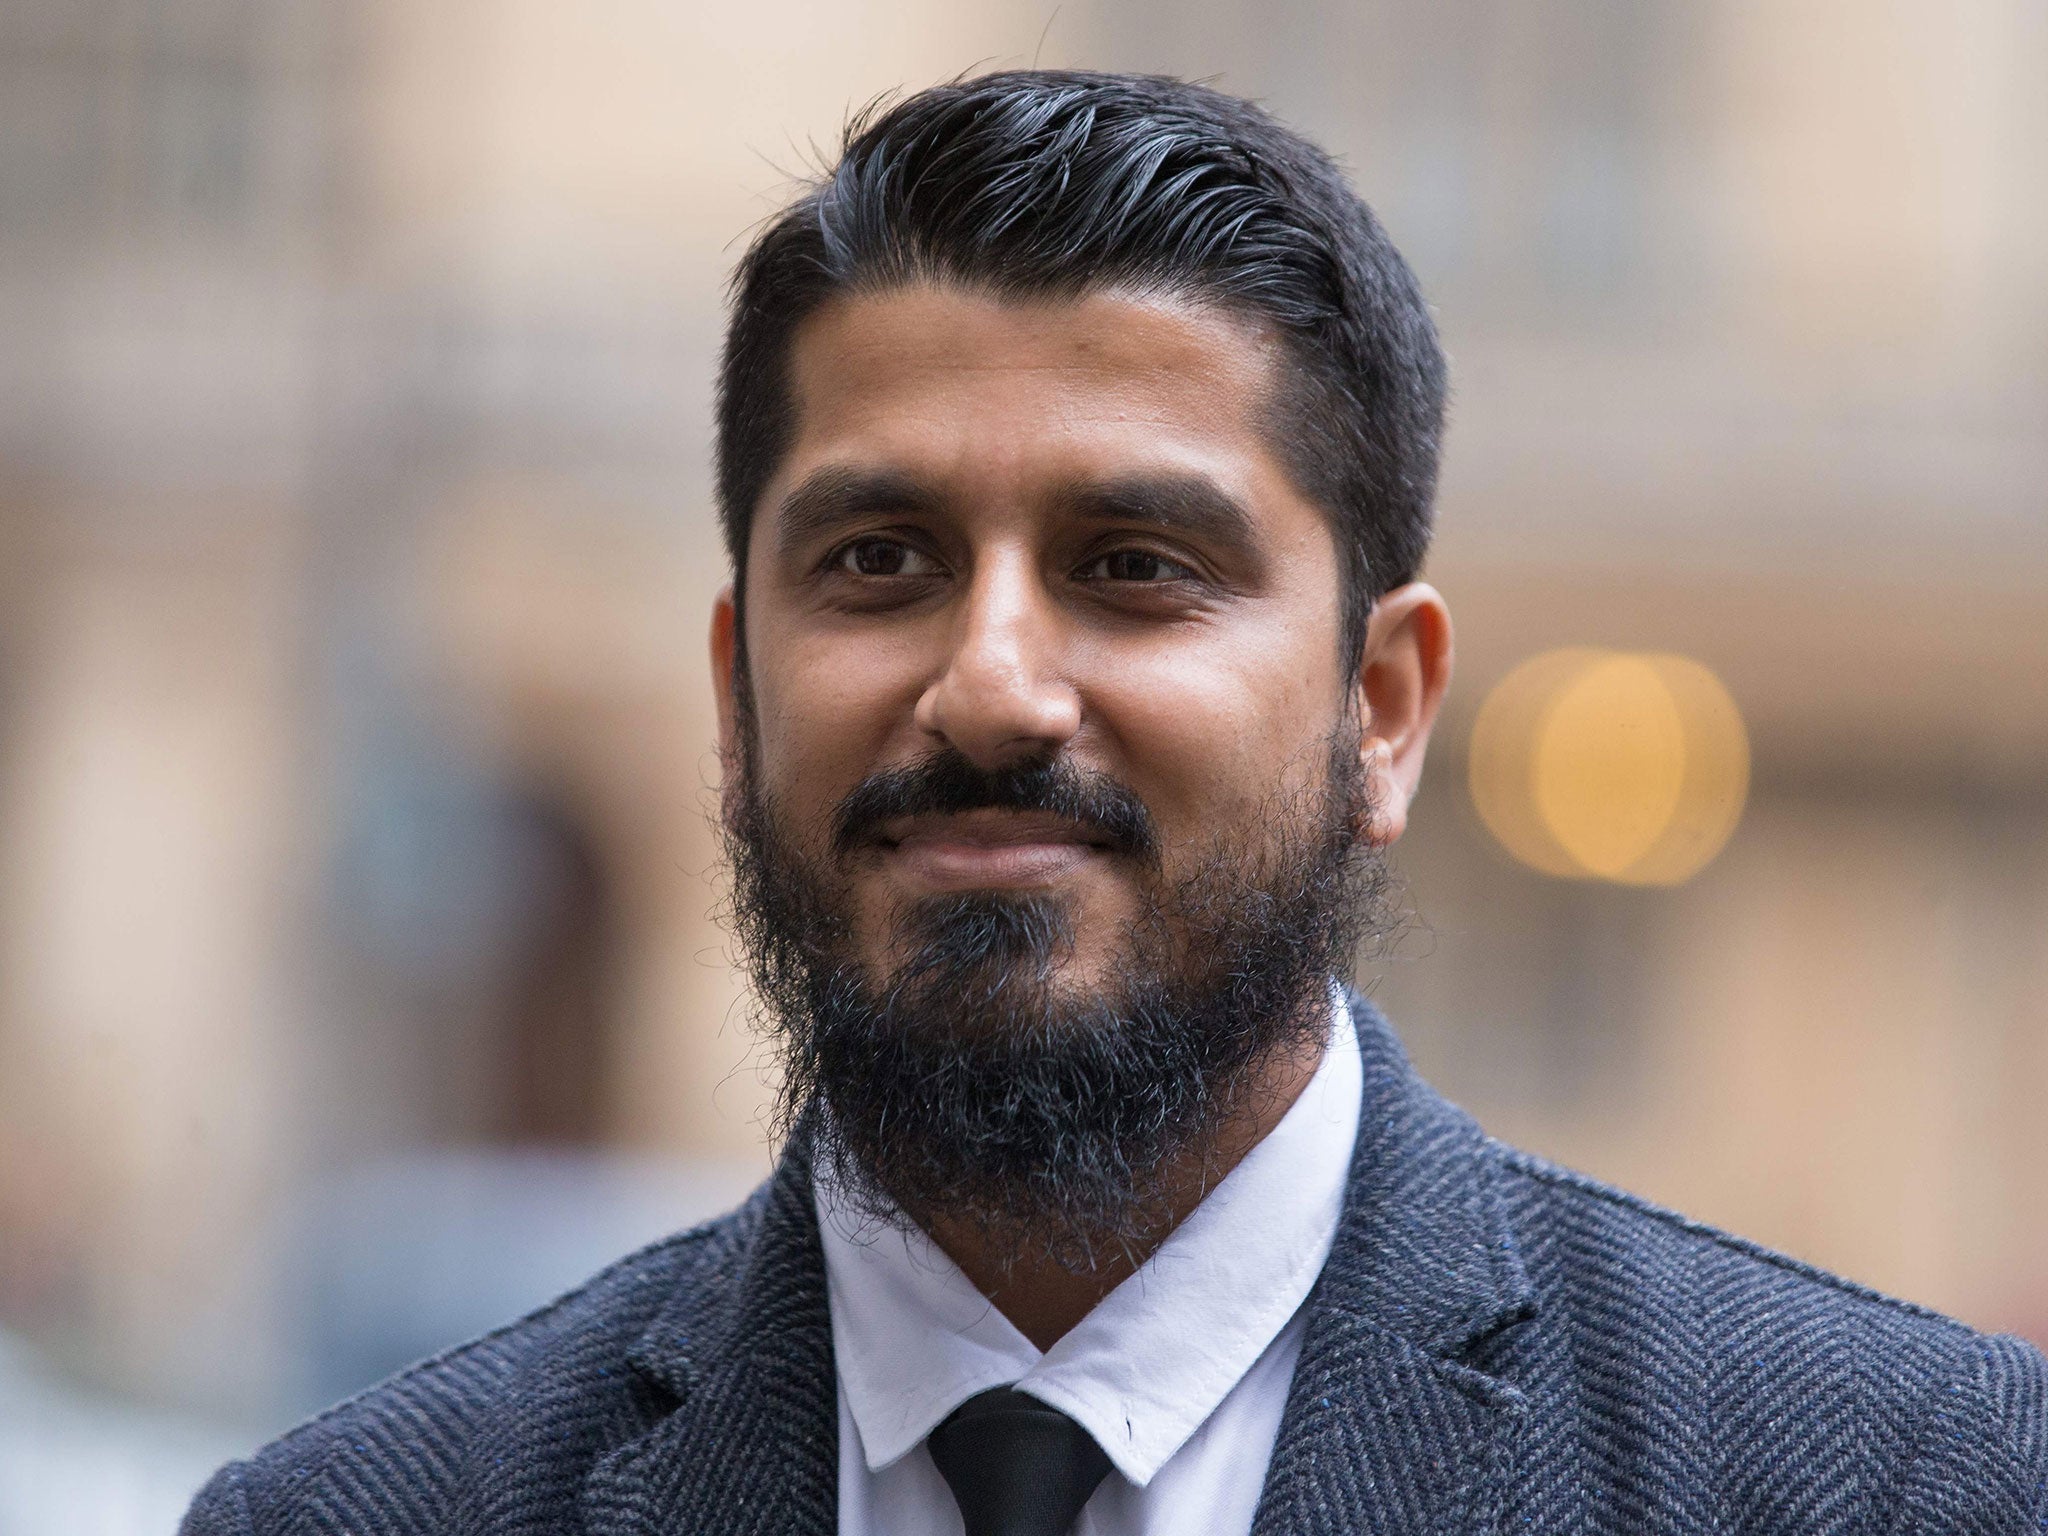 International director of campaign group Cage, Muhammad Rabbani, was convicted at Westminster Magistrates' Court on 25 September